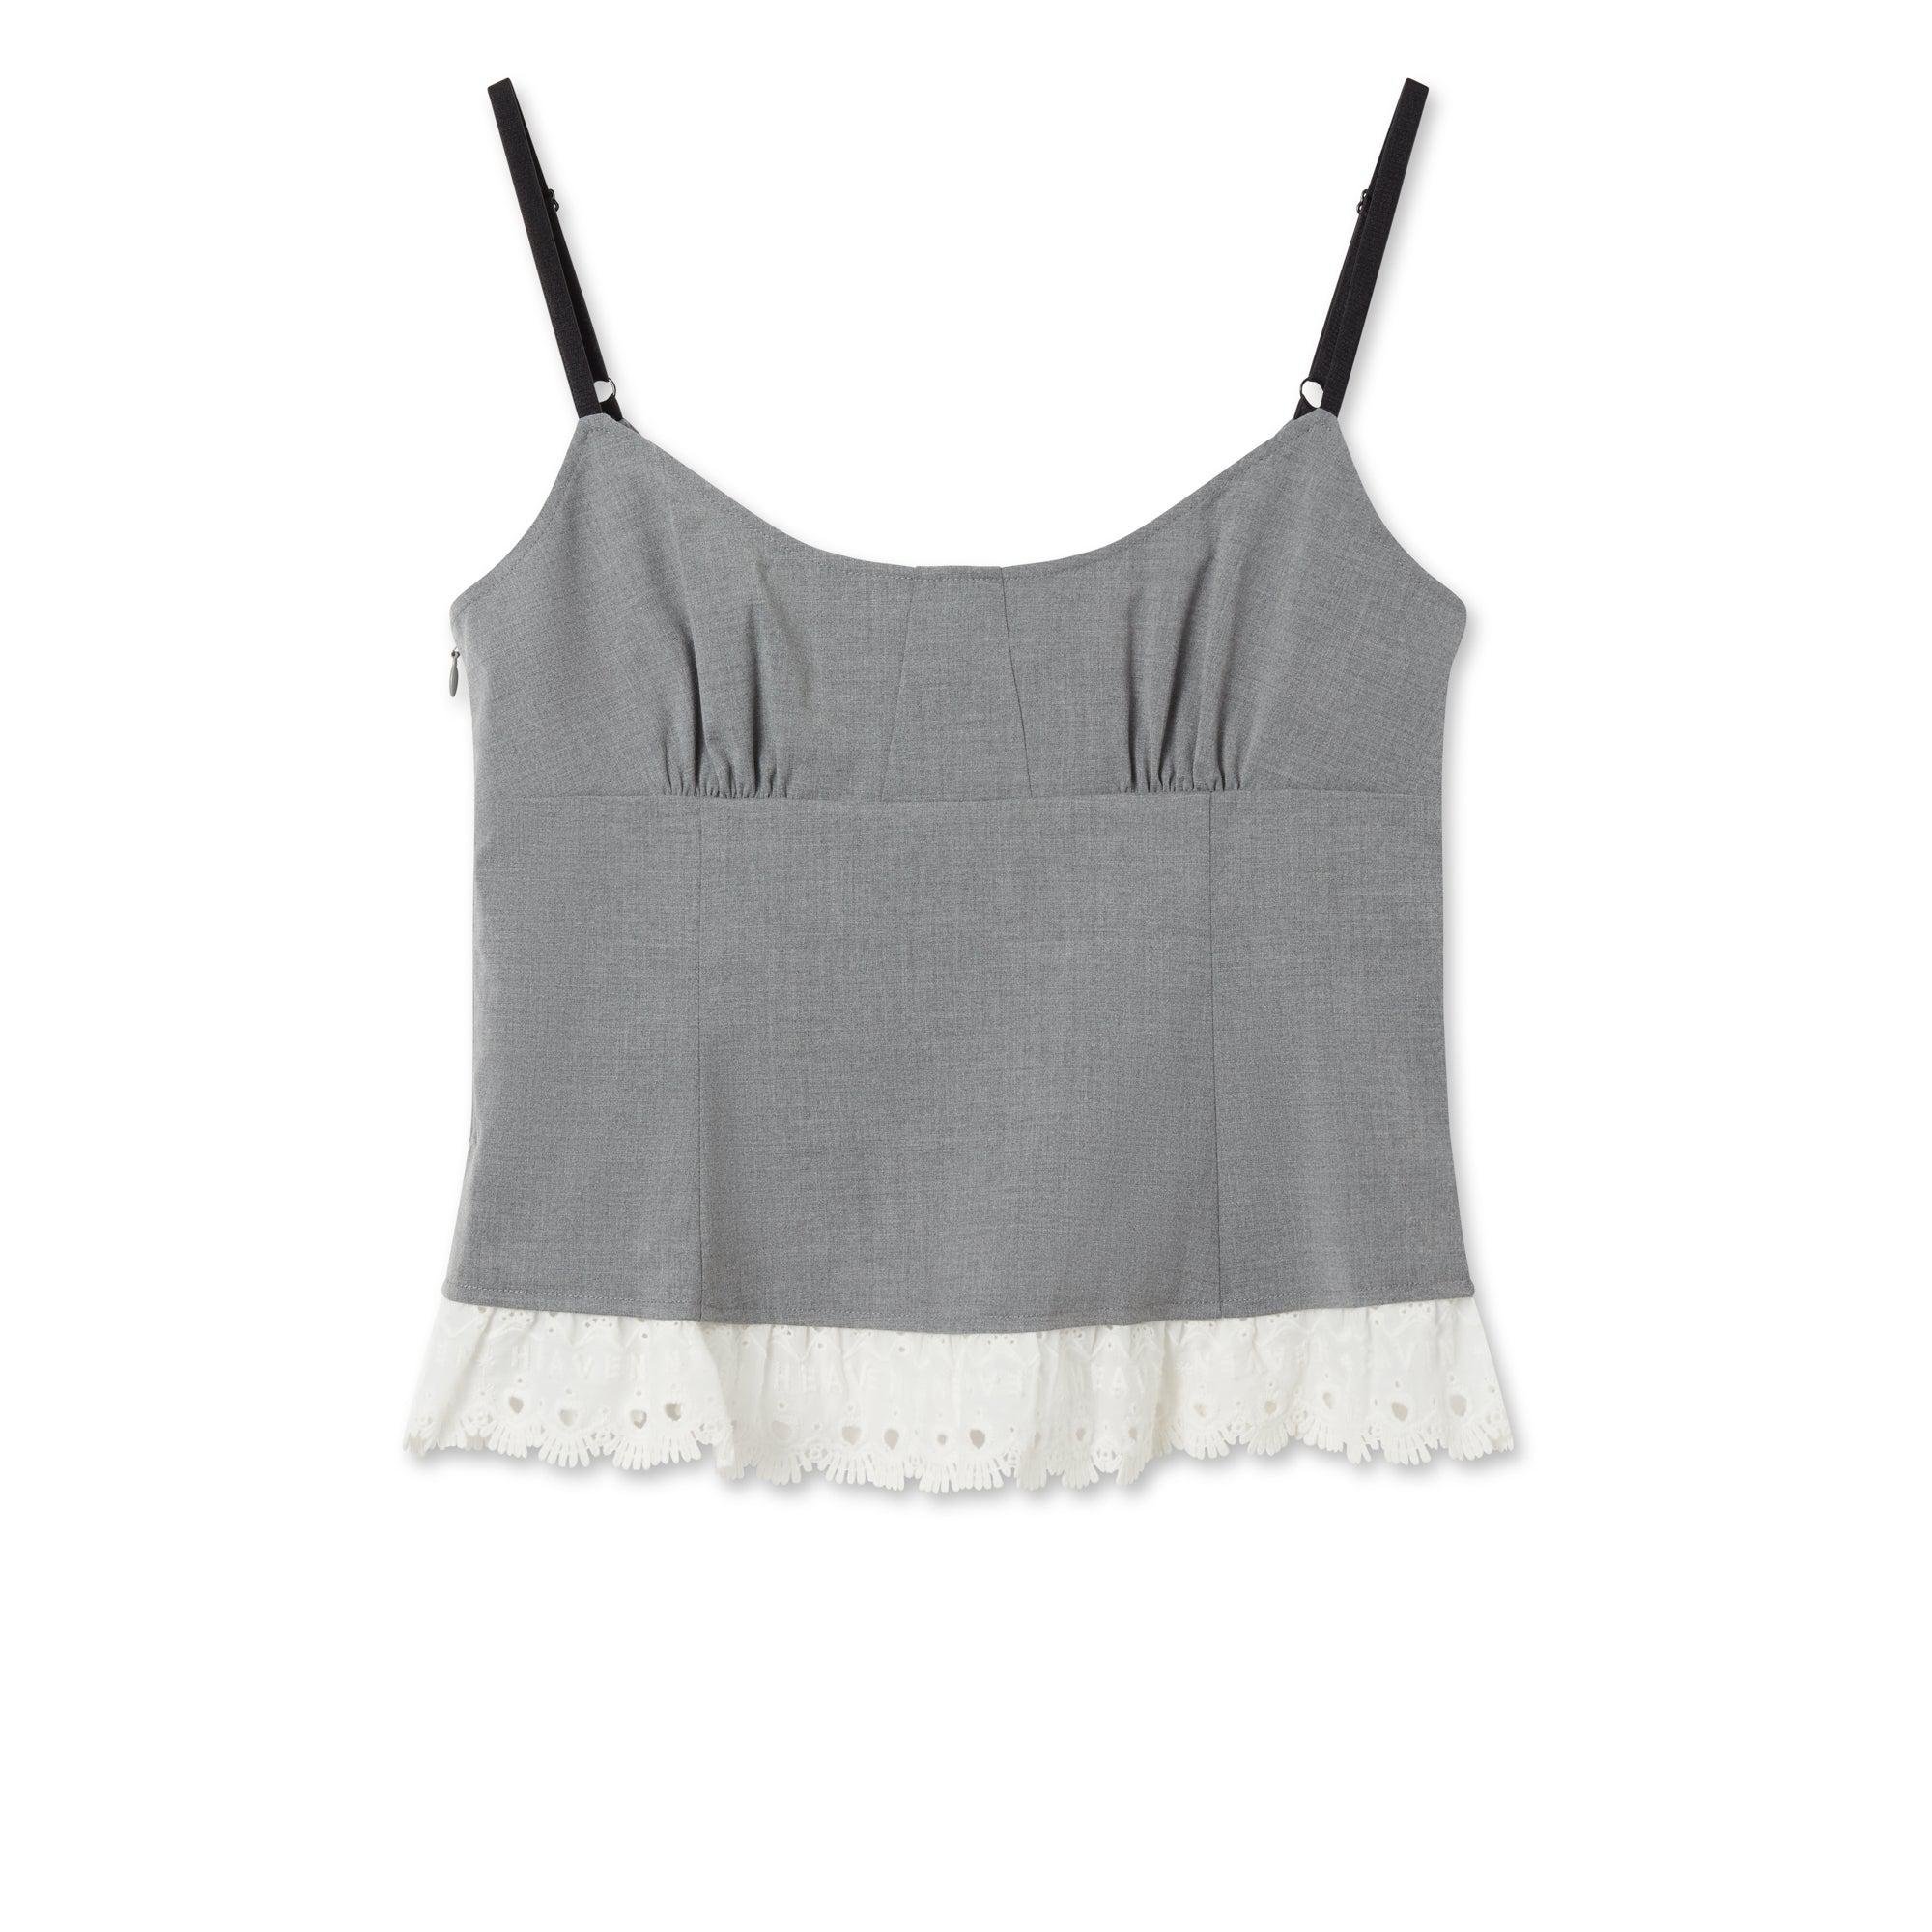 Heaven by Marc Jacobs - Women's Tailored Lace Camisole - (Dark